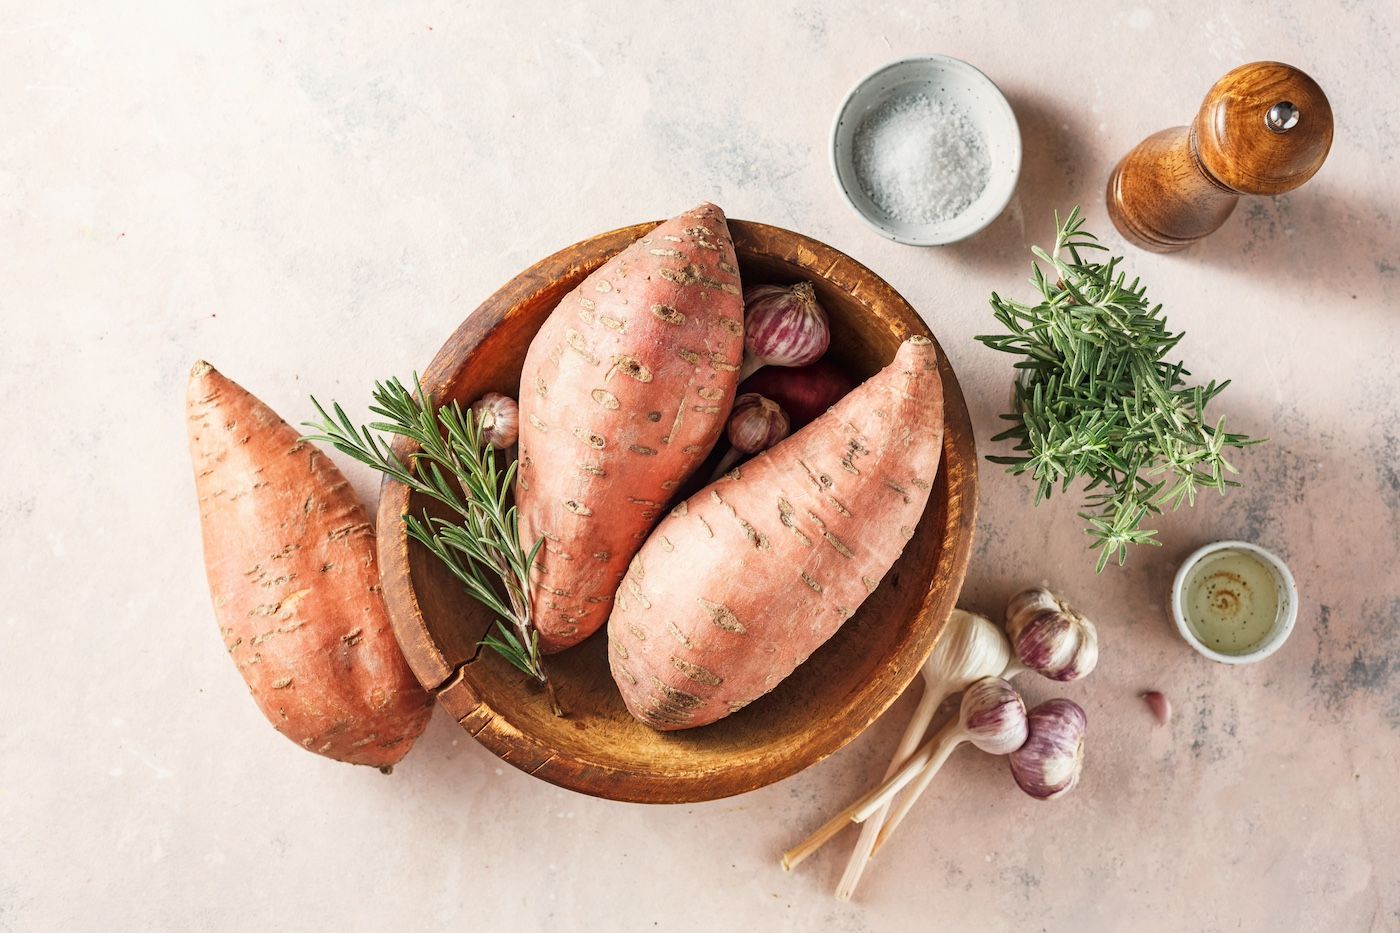 Sweet Potatoes Are Nutrient-Rich Root Vegetables Known for Their Delicious Taste and Health Benefits